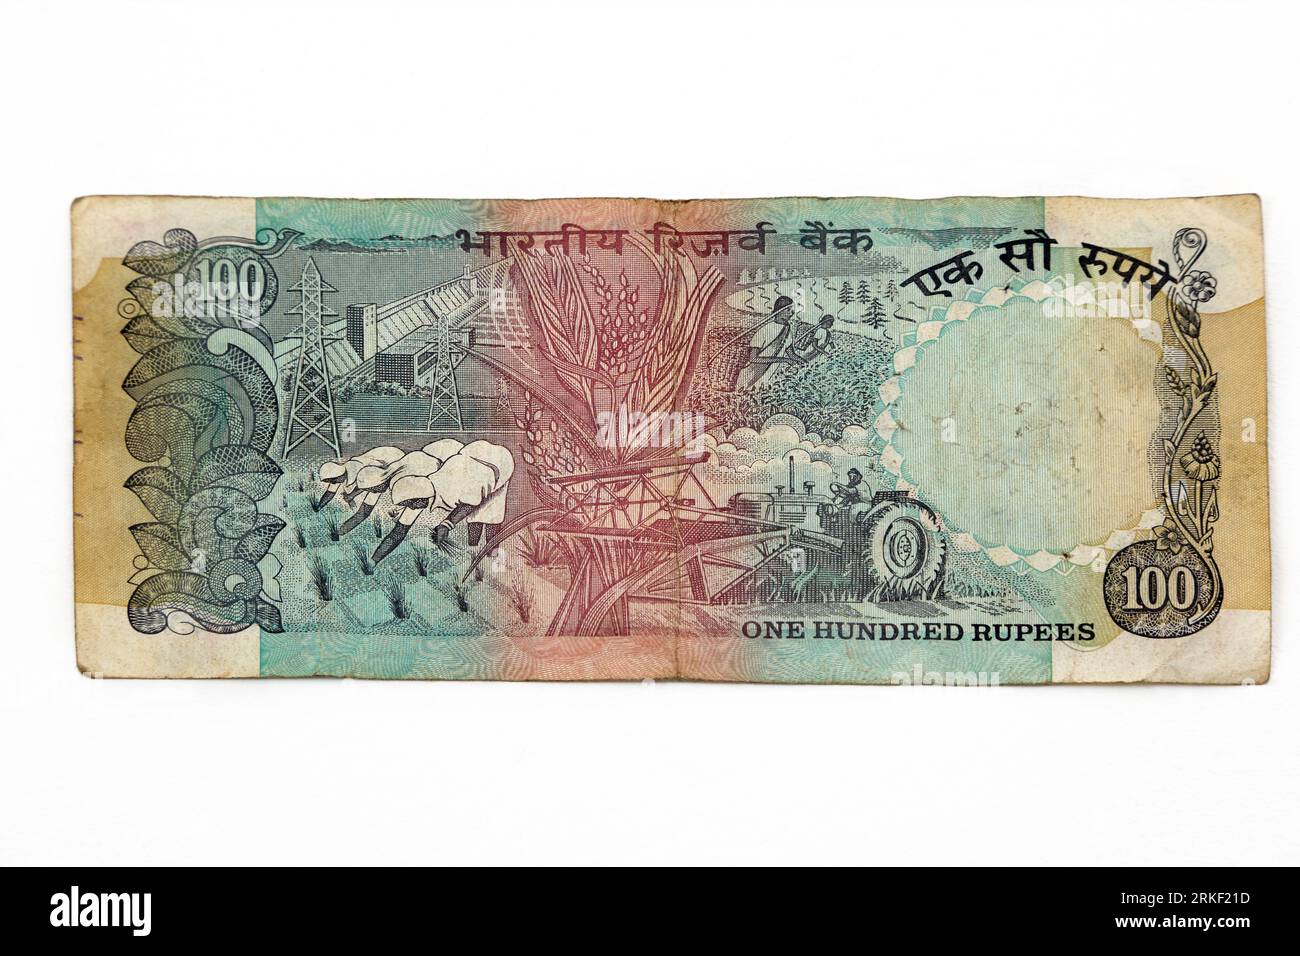 Reserve Bank of India Lion Capital Series Banknotes II - One Hundred Rupees Issued 1975 -1995 Reverse Side showing Agriculture Endevour Stock Photo